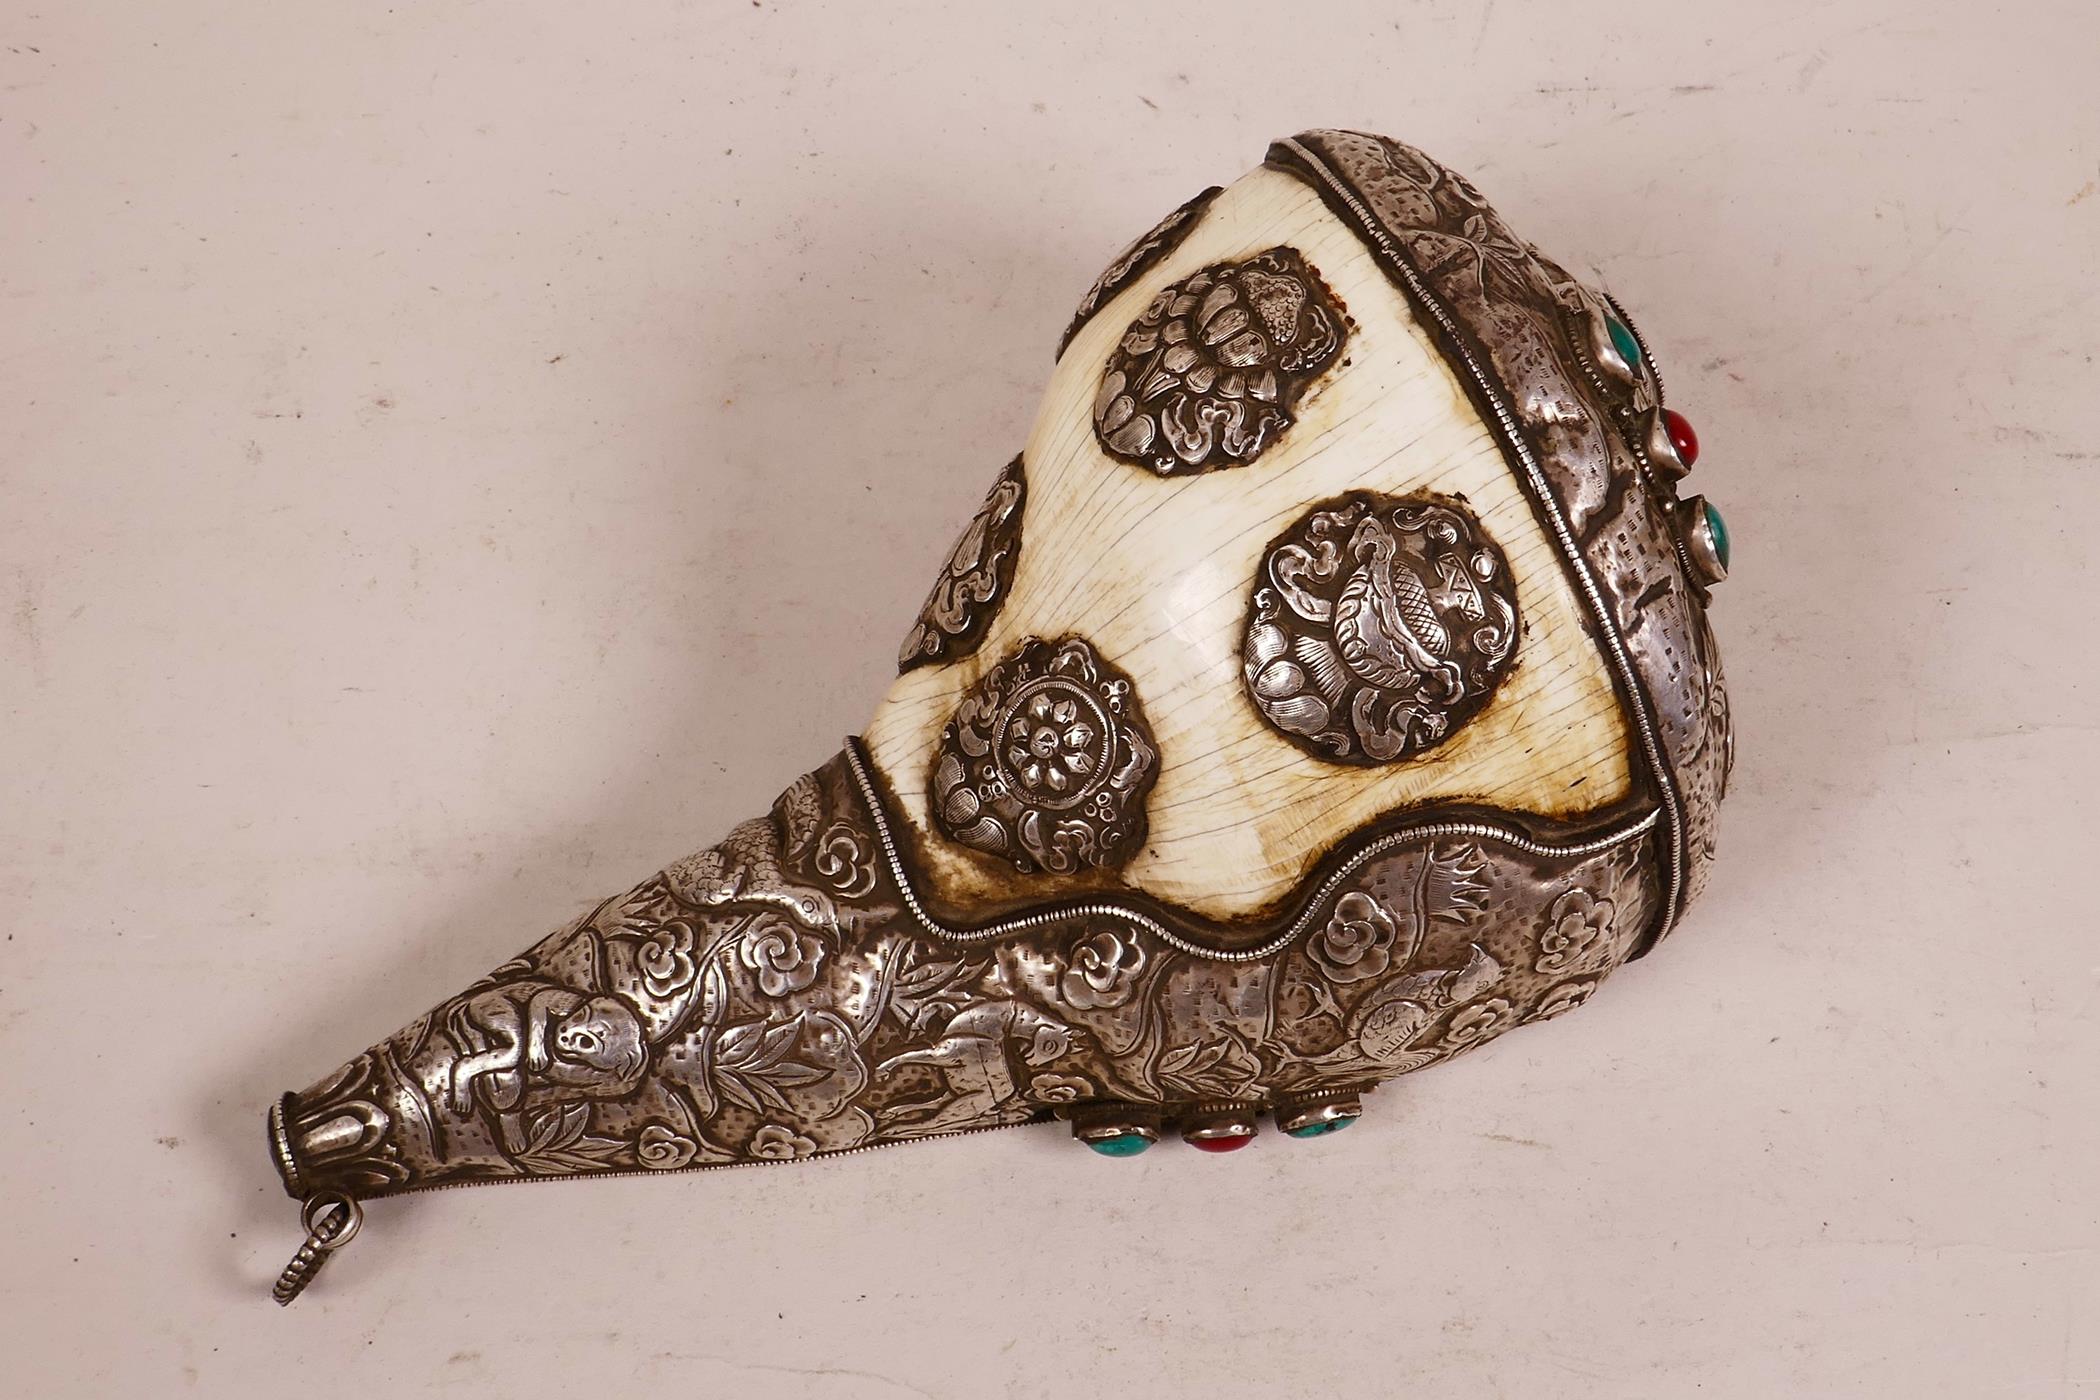 A large Tibetan white metal mounted conch shell, with repoussé decoration of the eight Buddhist